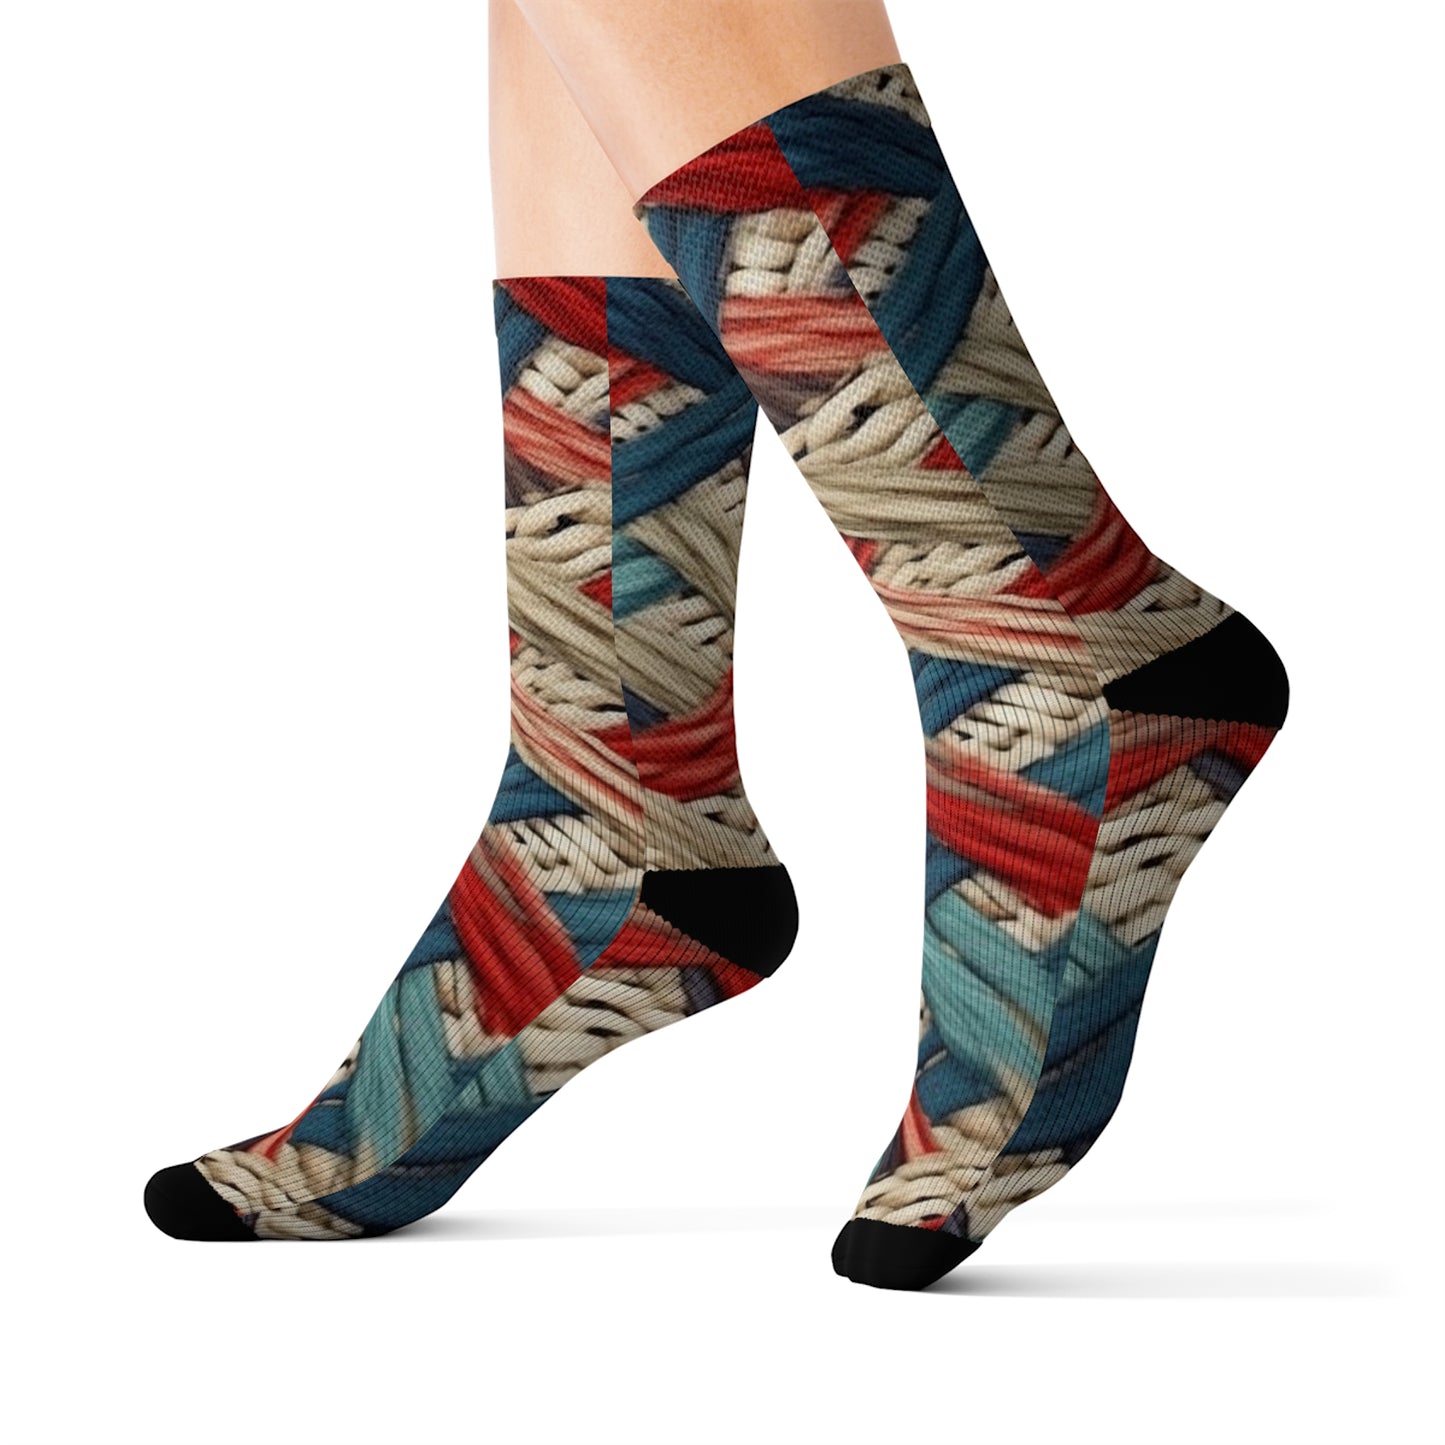 Colorful Yarn Knot: Denim-Inspired Fabric in Red, White, Light Blue - Sublimation Socks